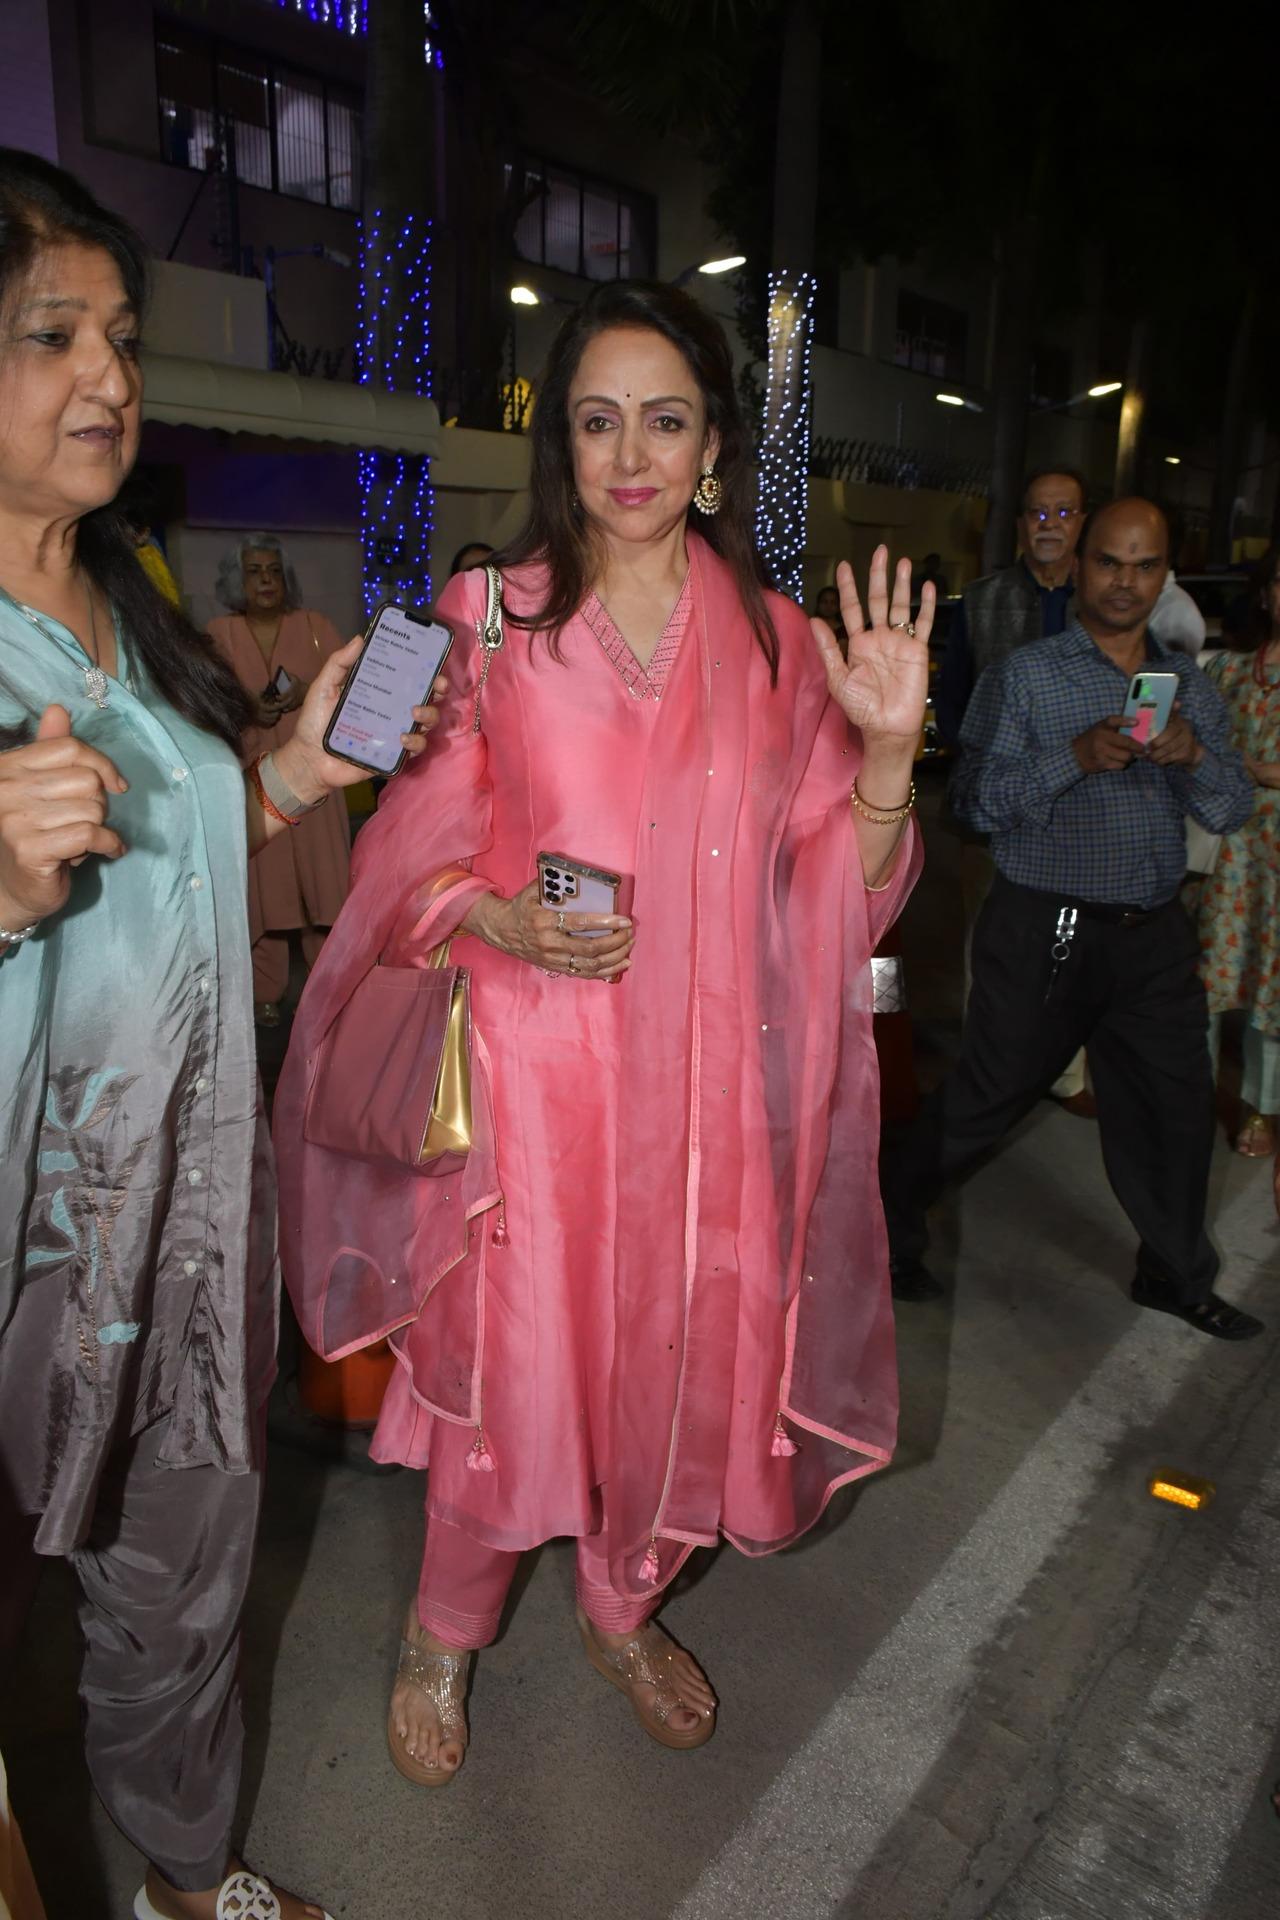 Hema Malini was seen at the function in a rose pink salwar kameez